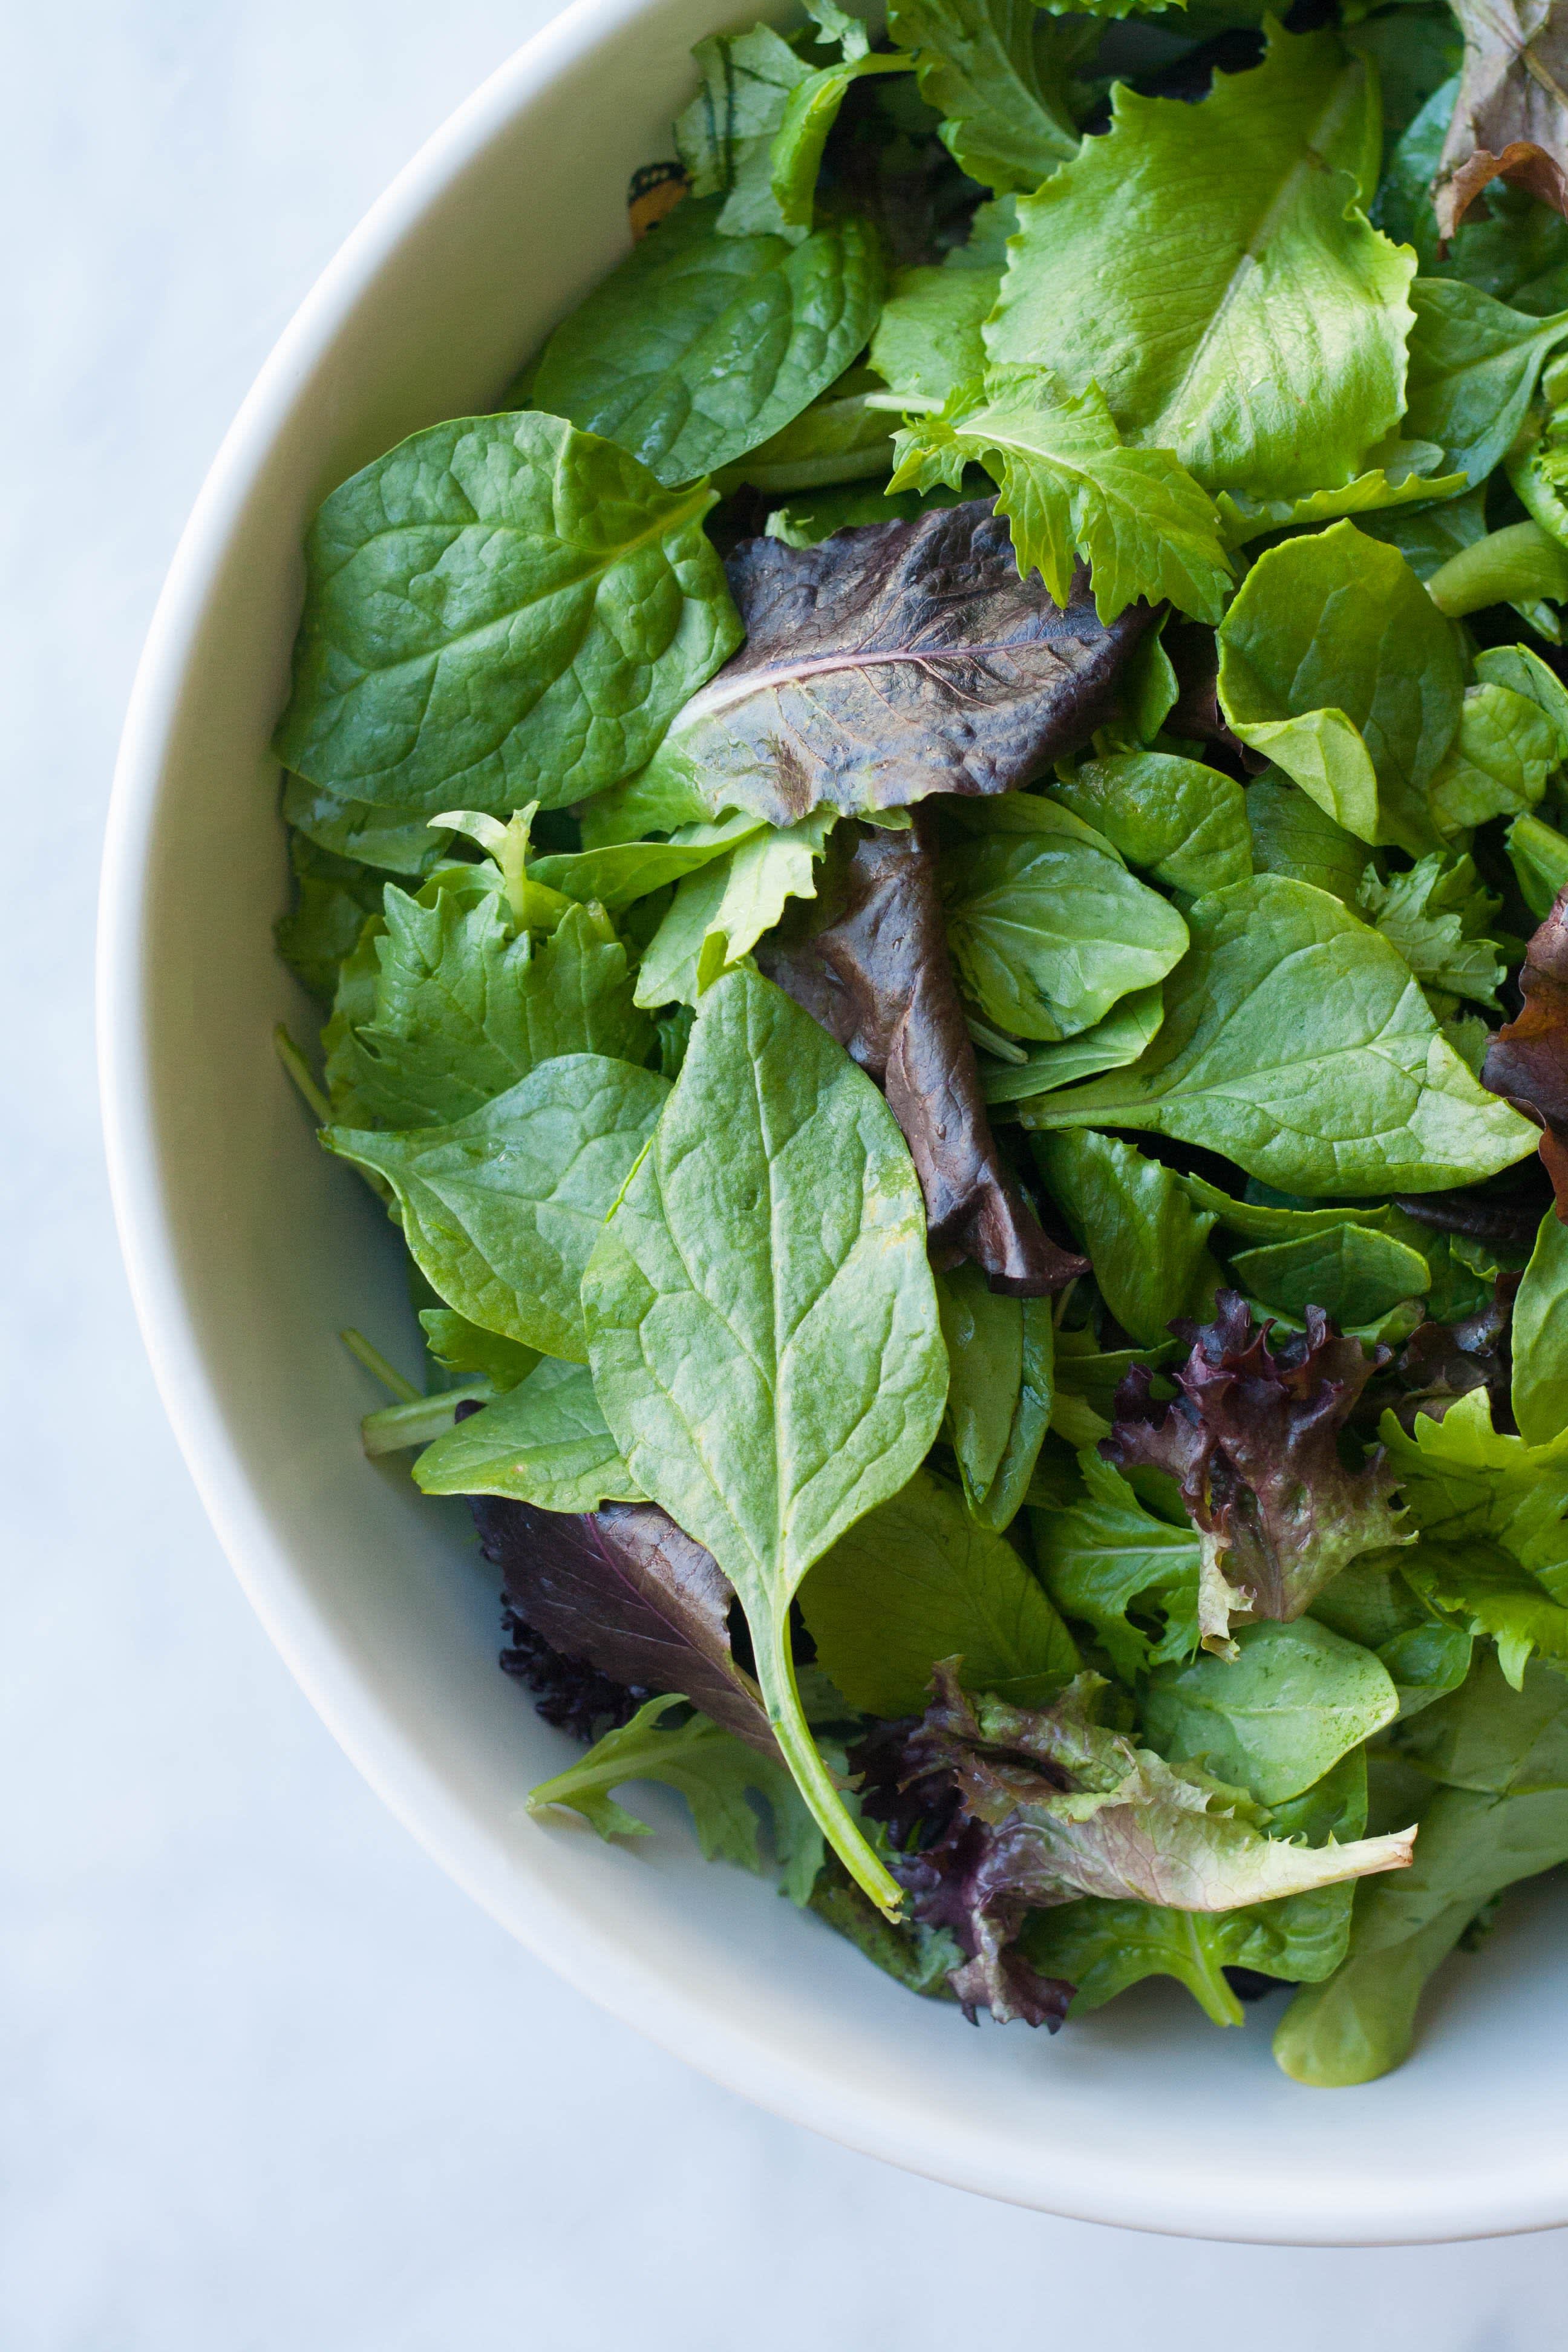 Is It Safe to Eat Slimy Salad Greens?